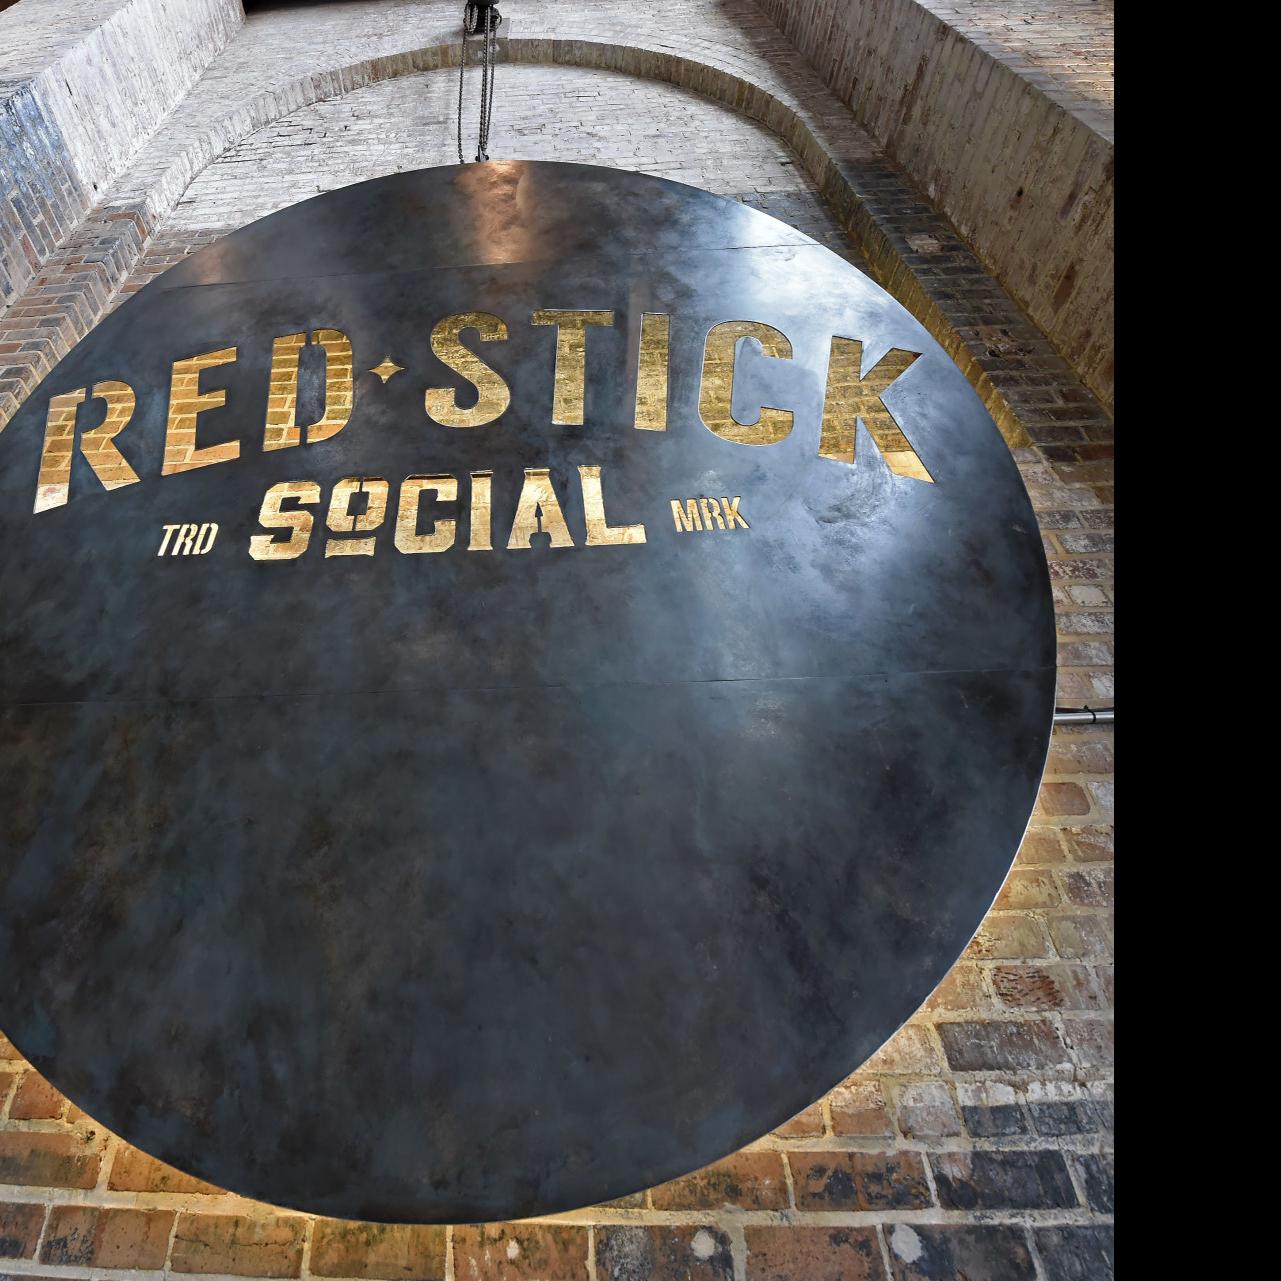 Red Stick Social issues apology, takes down dress code Facebook